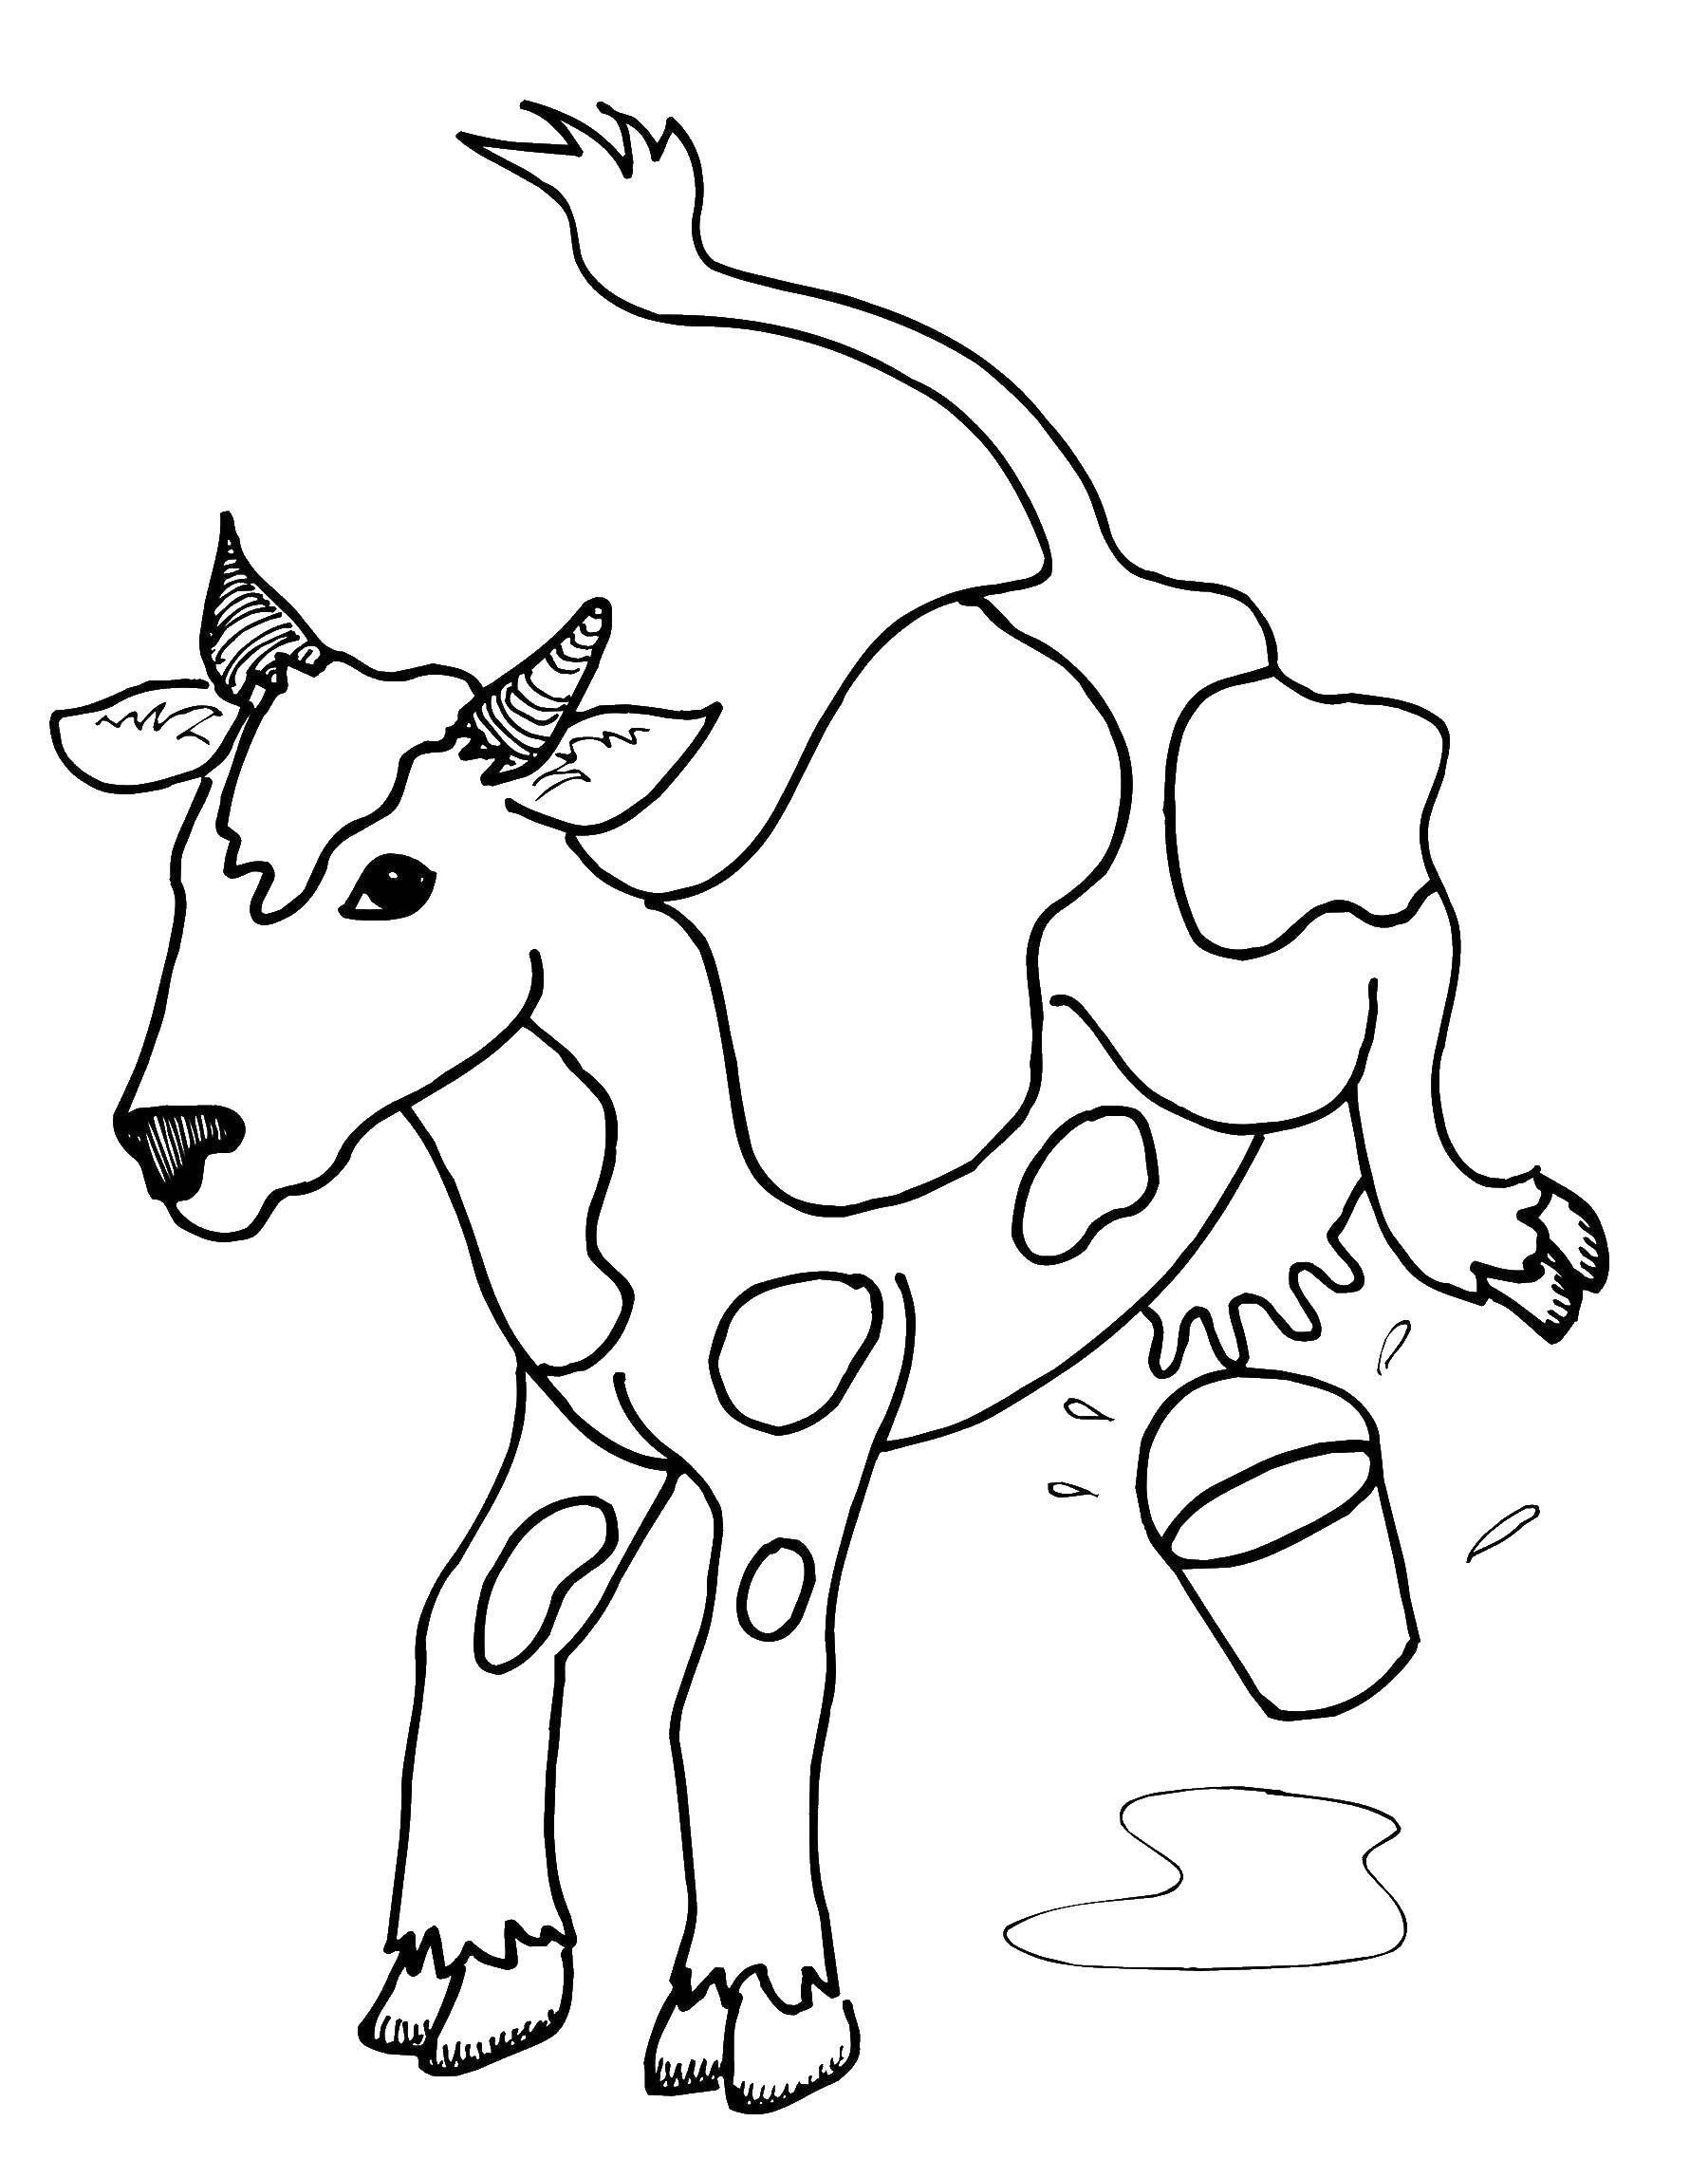 Coloring Goat. Category Animals. Tags:  animals, goat, goat.